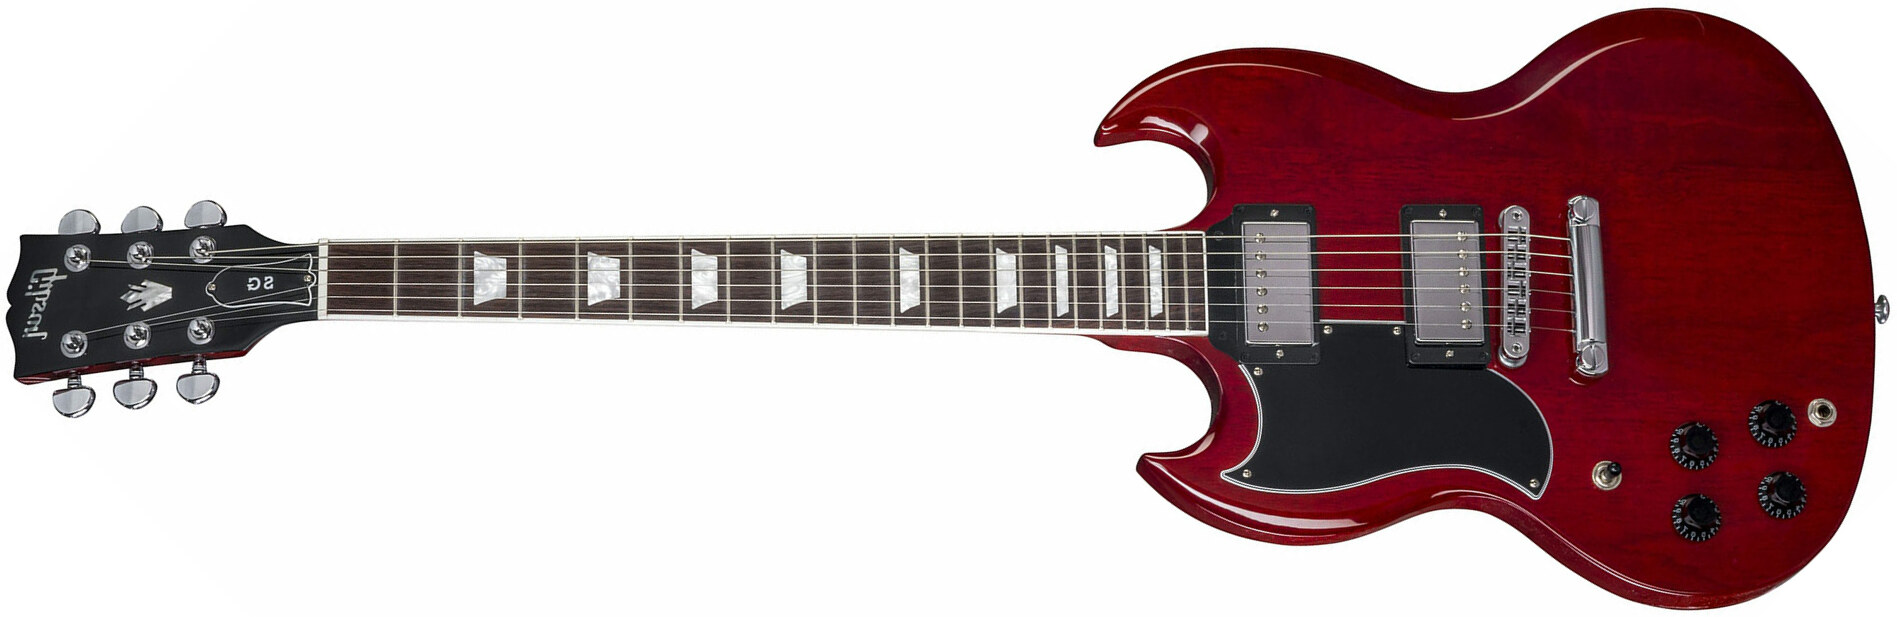 Gibson Sg Standard 2018 Lh Gaucher - Heritage Cherry - Left-handed electric guitar - Main picture